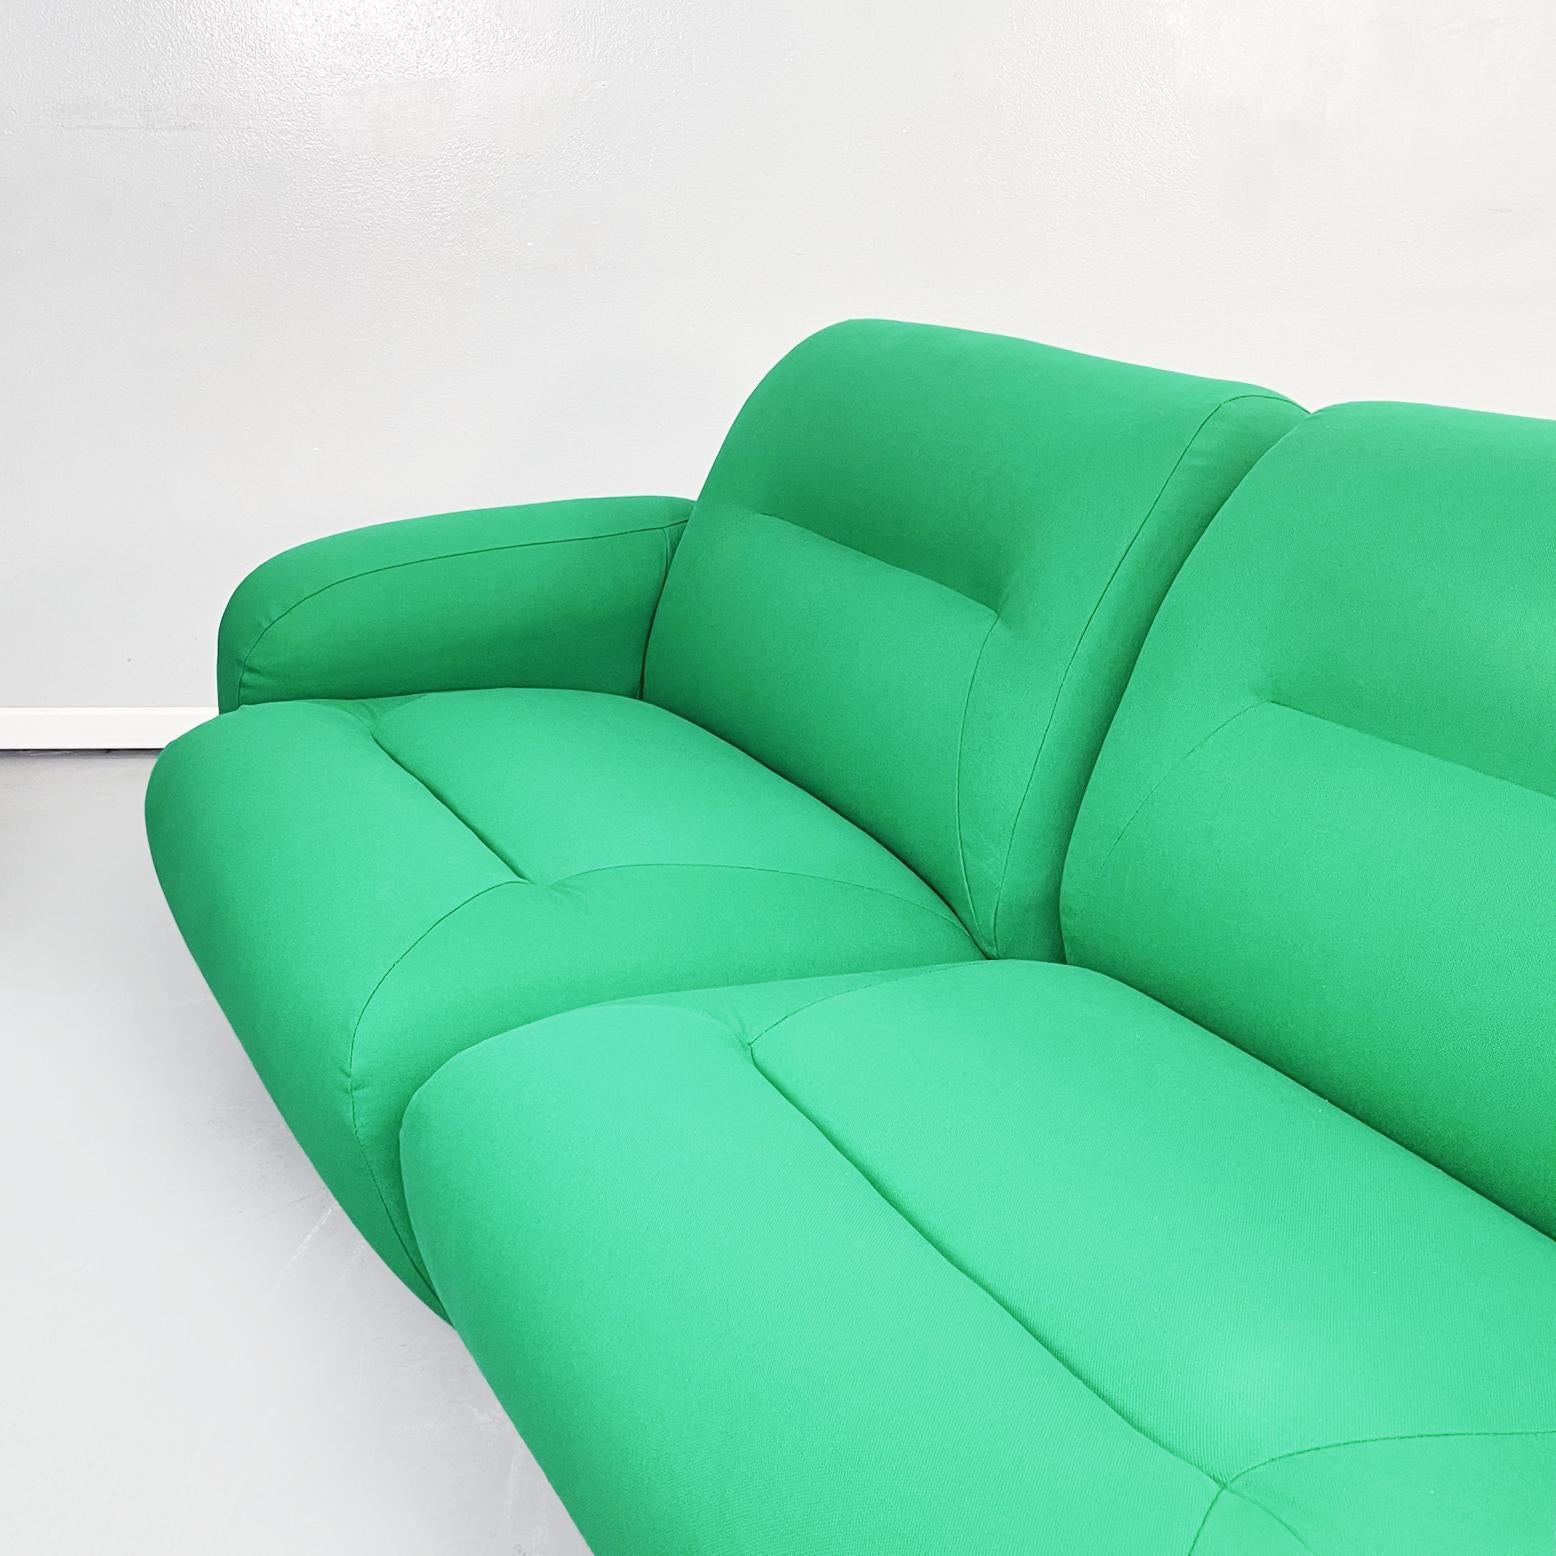 Italian Space Age Modular Sofa in Green Fabric with Metal Insert, 1970s For Sale 3